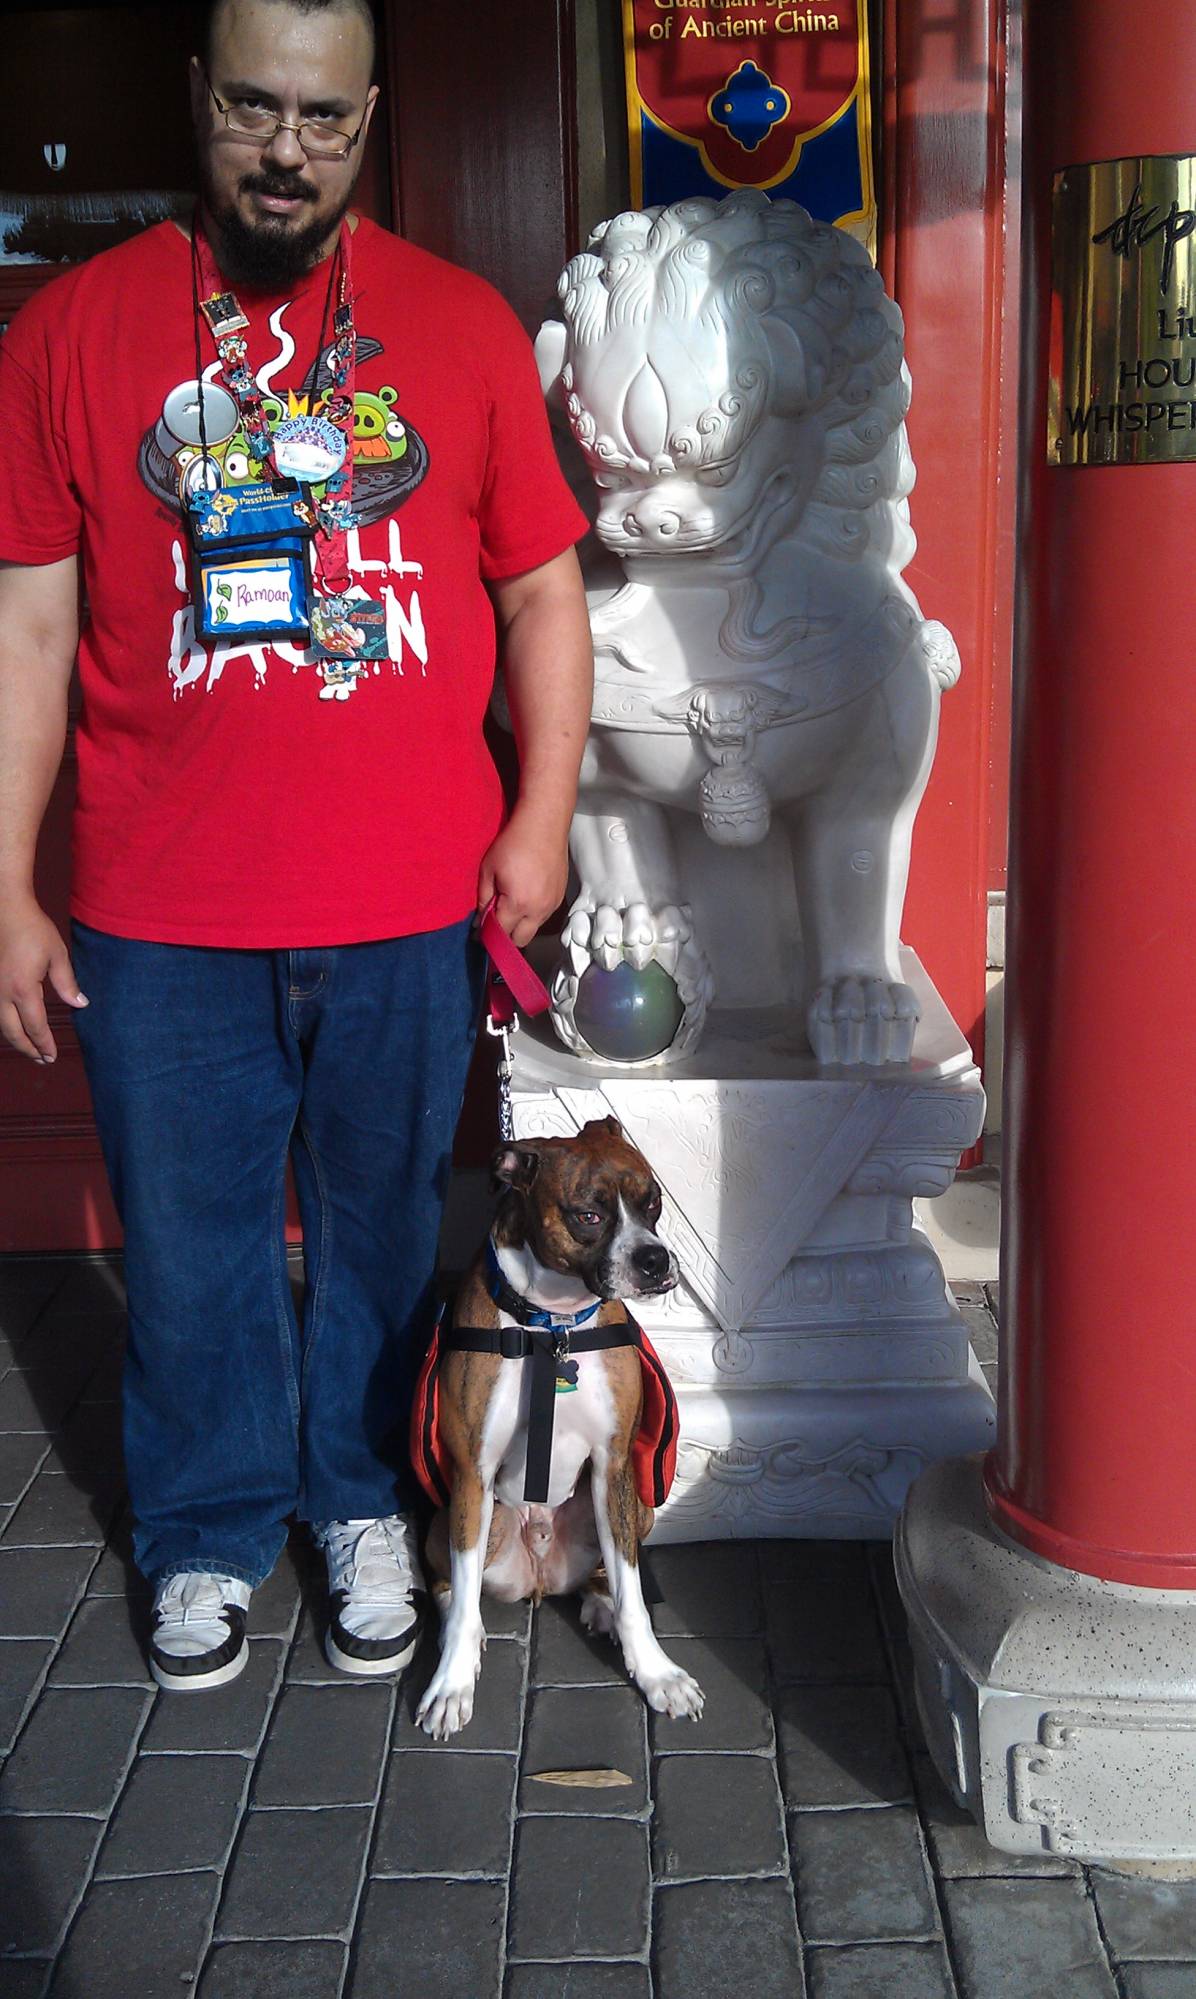 Ramoan and Merlin with a Chinese Guard dog